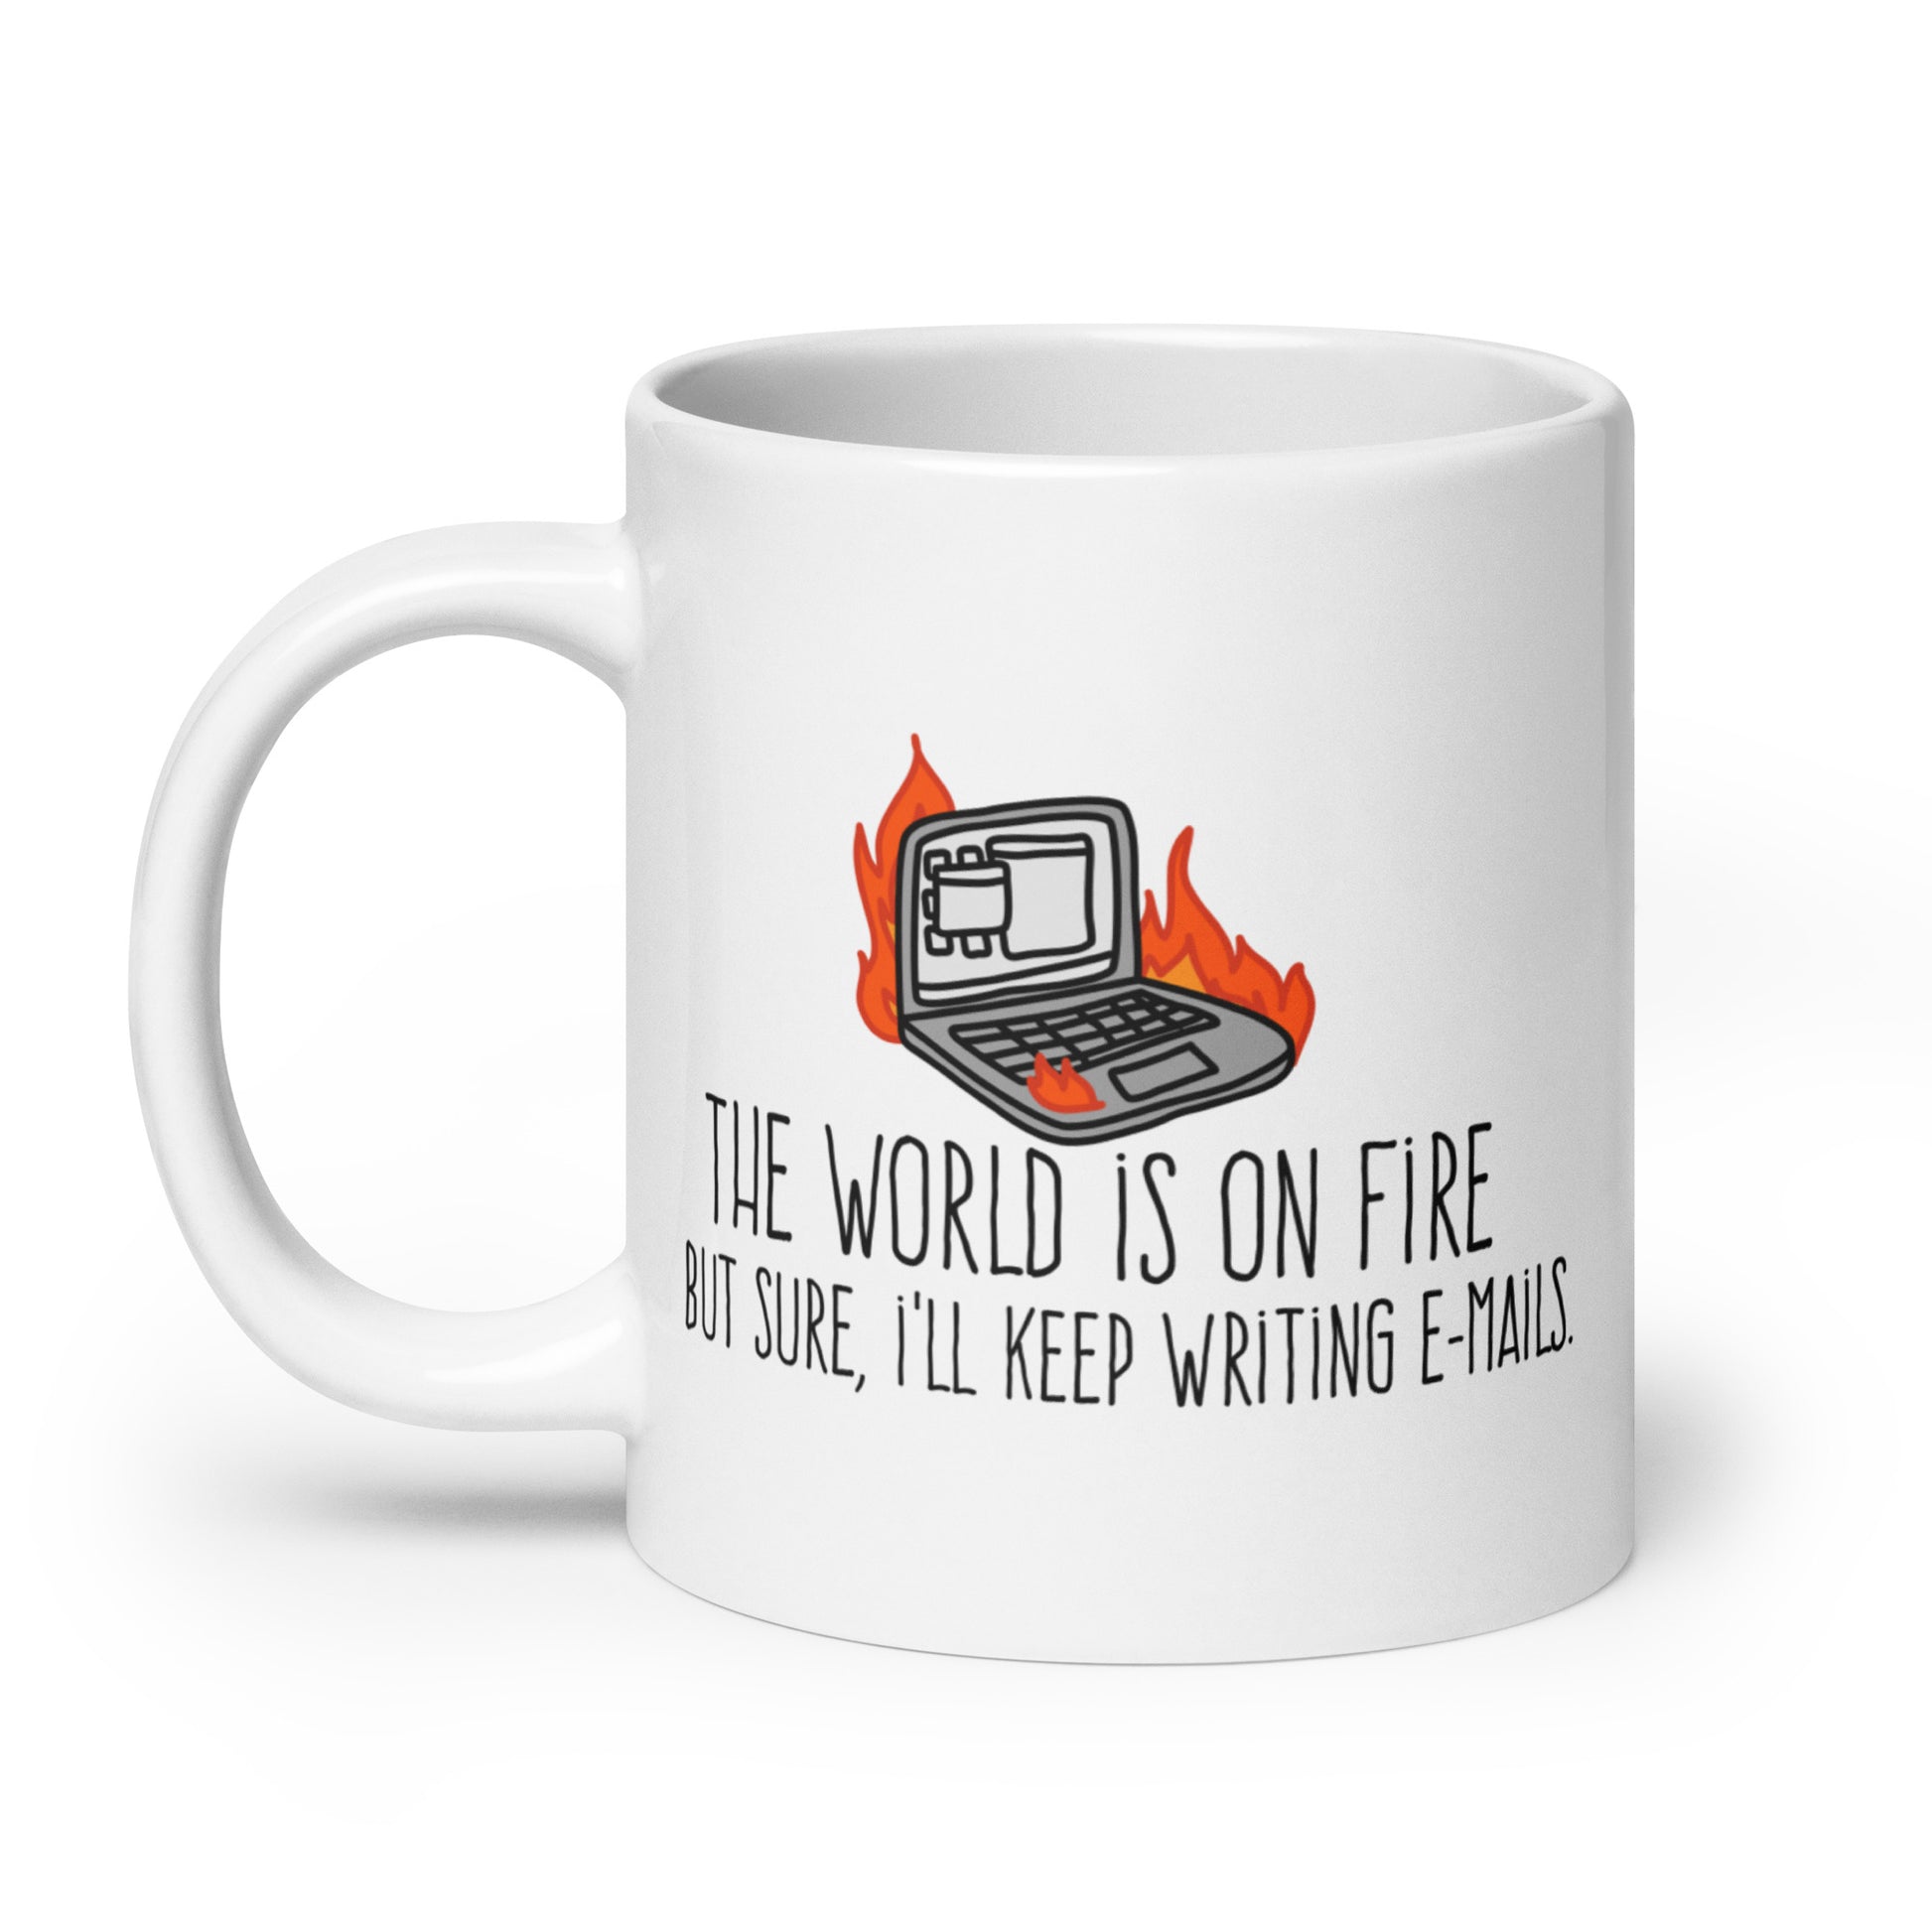 A white ceramic mug featuring a wobbly illustration of a laptop on fire. Text underneath the laptop reads "The world is on fire but sure, I'll keep writing e-mails"